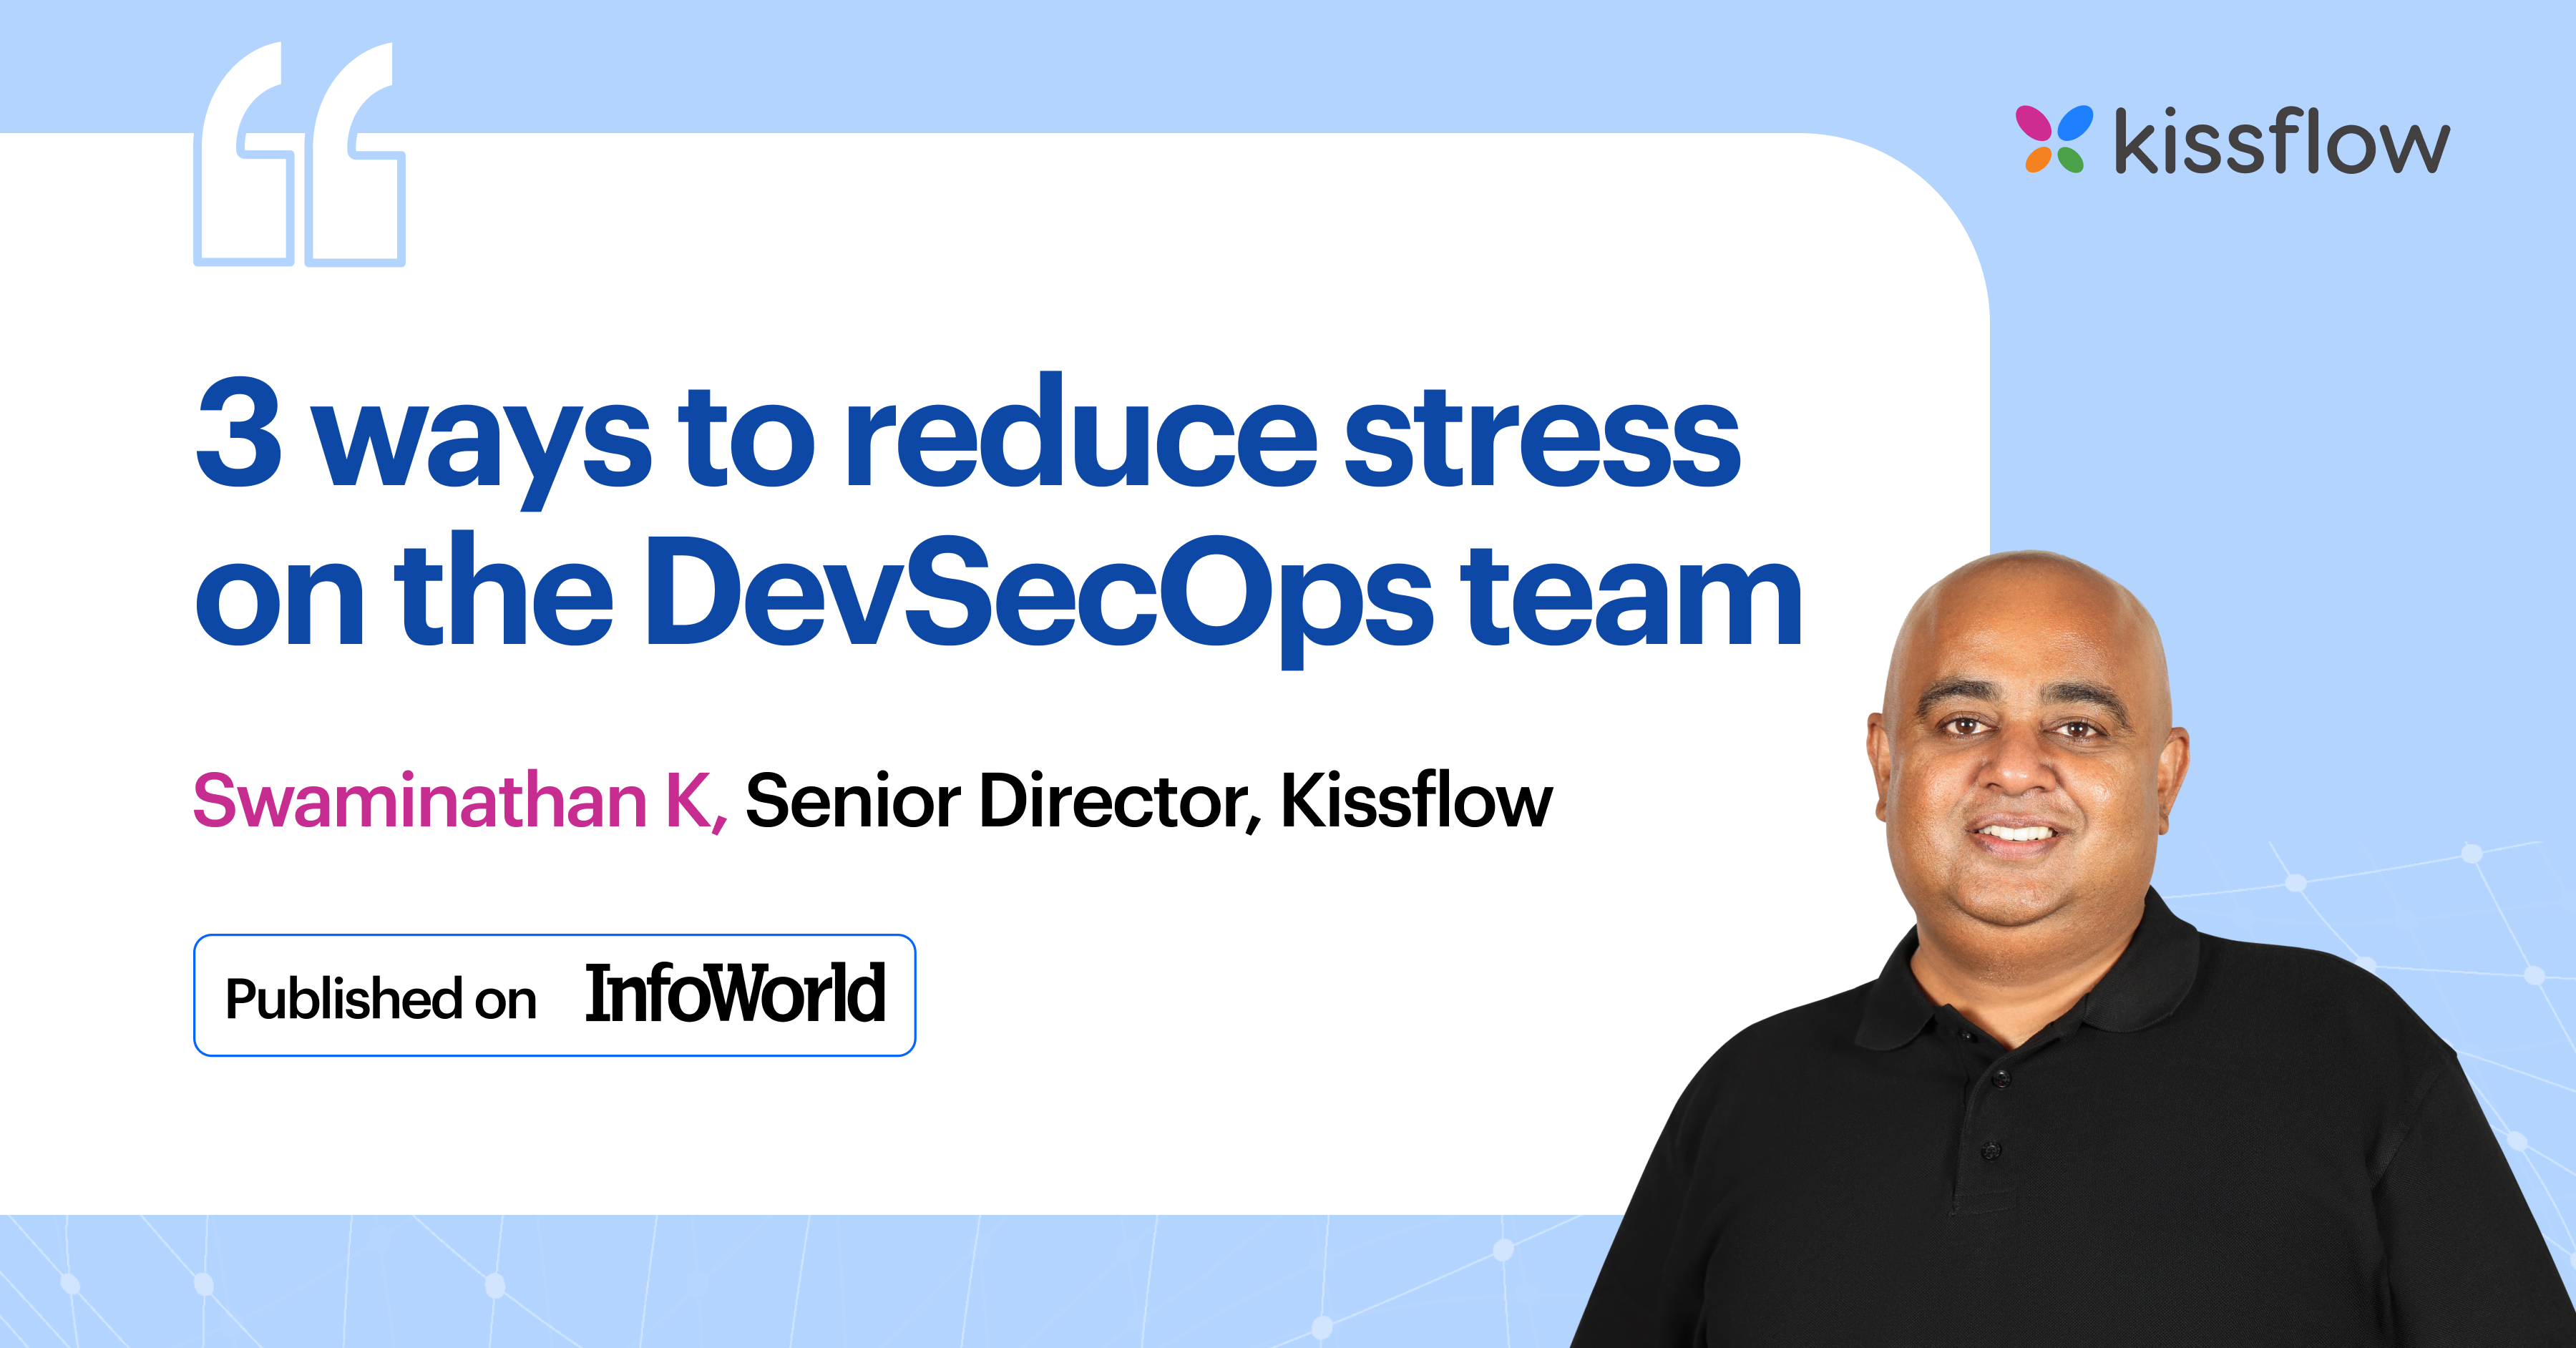 3 ways to reduce stress on the DevSecOps team